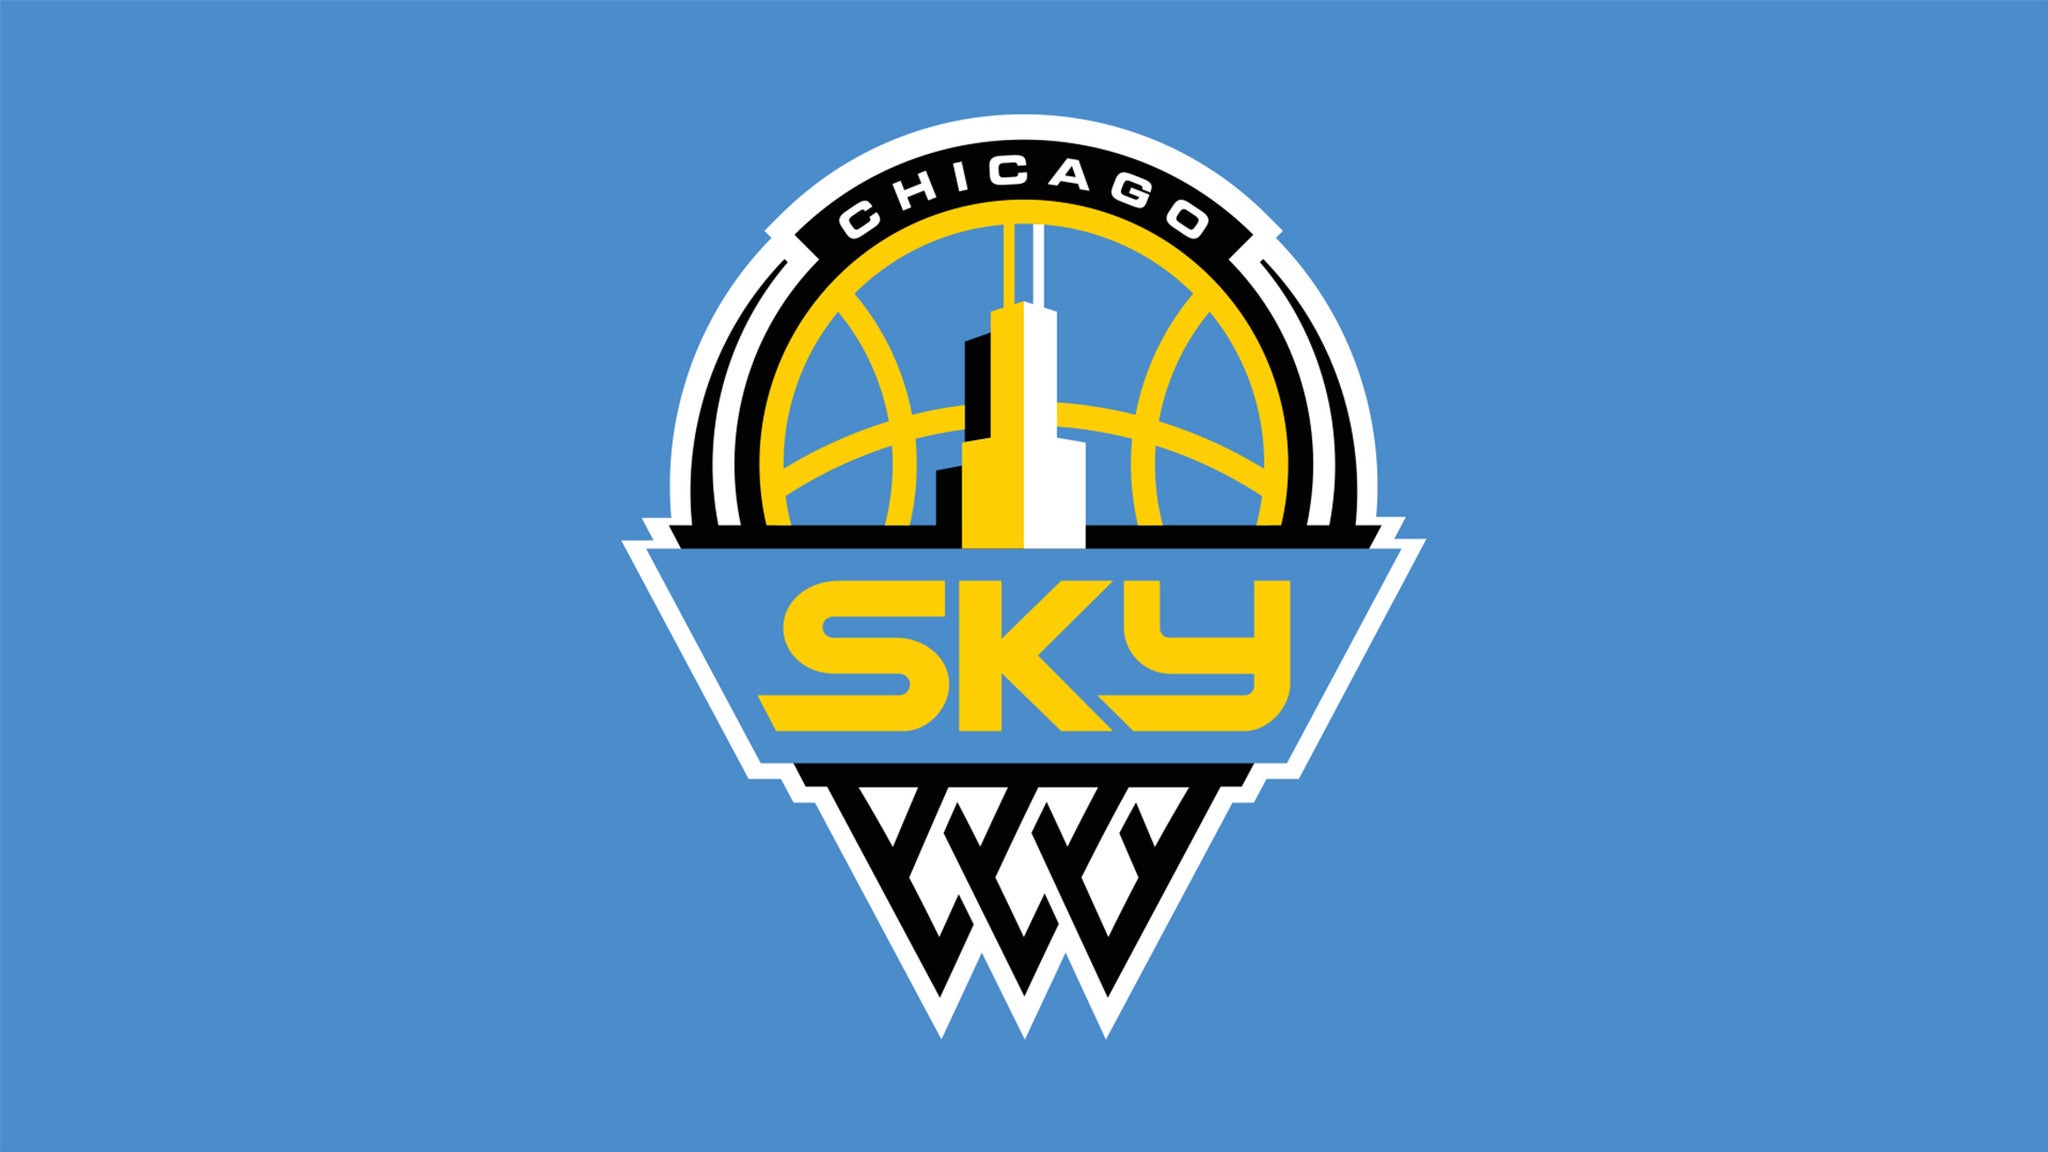 Seattle Storm vs. Chicago Sky in Seattle promo photo for Exclusive presale offer code